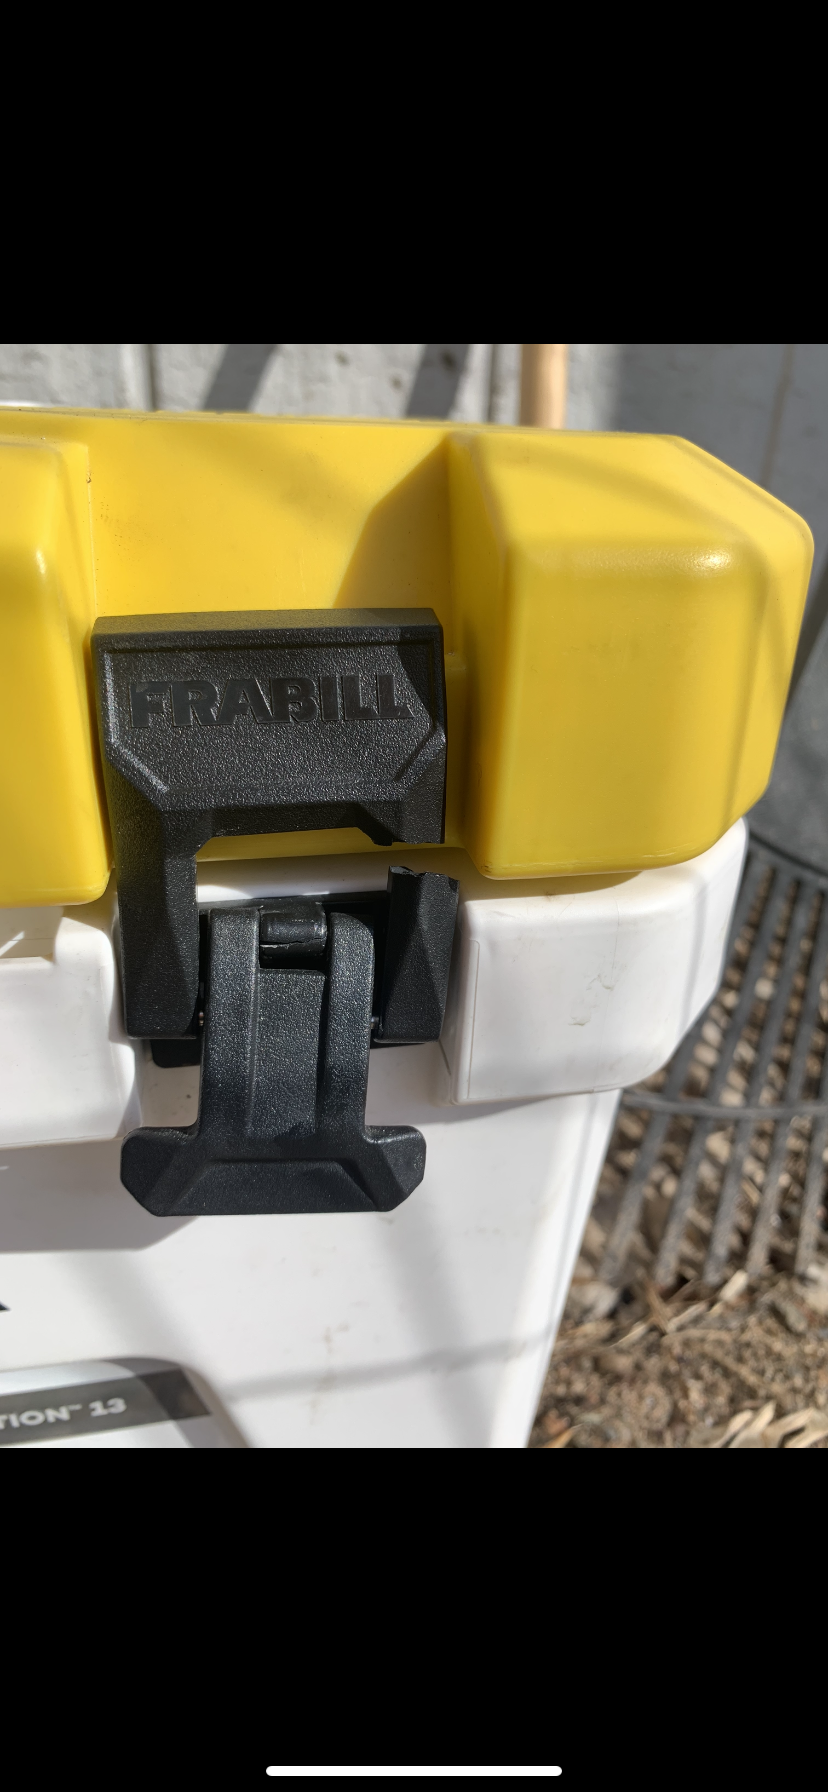 Frabill Bait Station Latches - General Discussion Forum - General